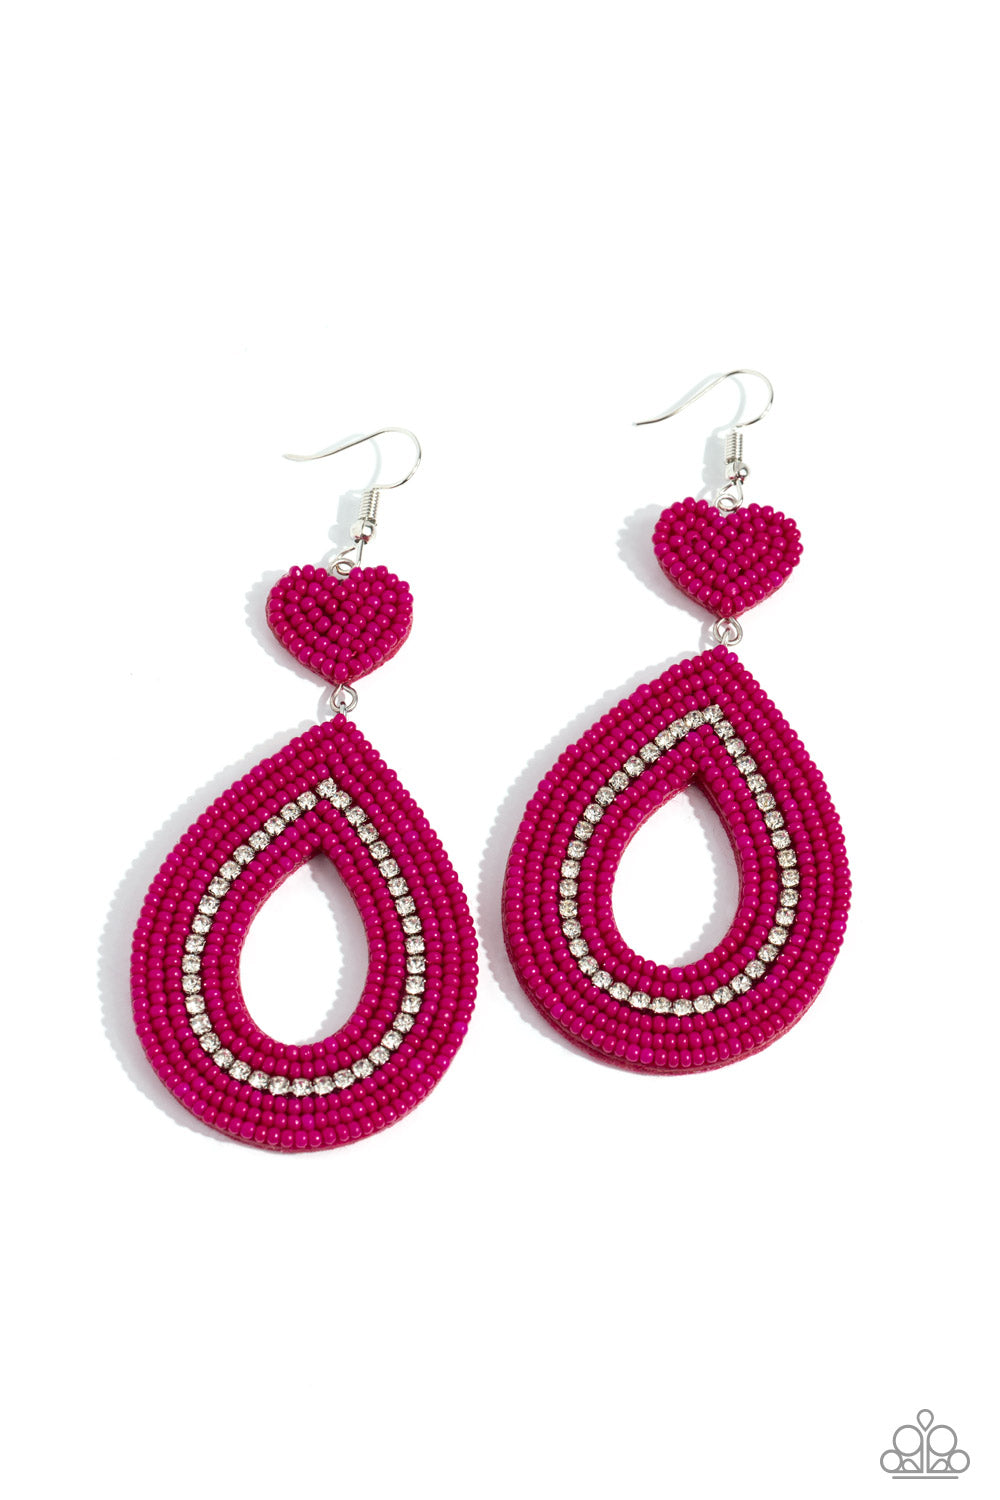 Now SEED Here Pink Heart Seed Bead Necklace - Paparazzi Accessories  Featuring white rhinestone accents, hot pink seed beads adorn the surface of a teardrop frame that swings from the bottom of a hot pink seed bead heart, creating a colorful lure. Earring attaches to a standard fishhook fitting.  Sold as one pair of earrings.  SKU: P5ST-PKXX-035XX